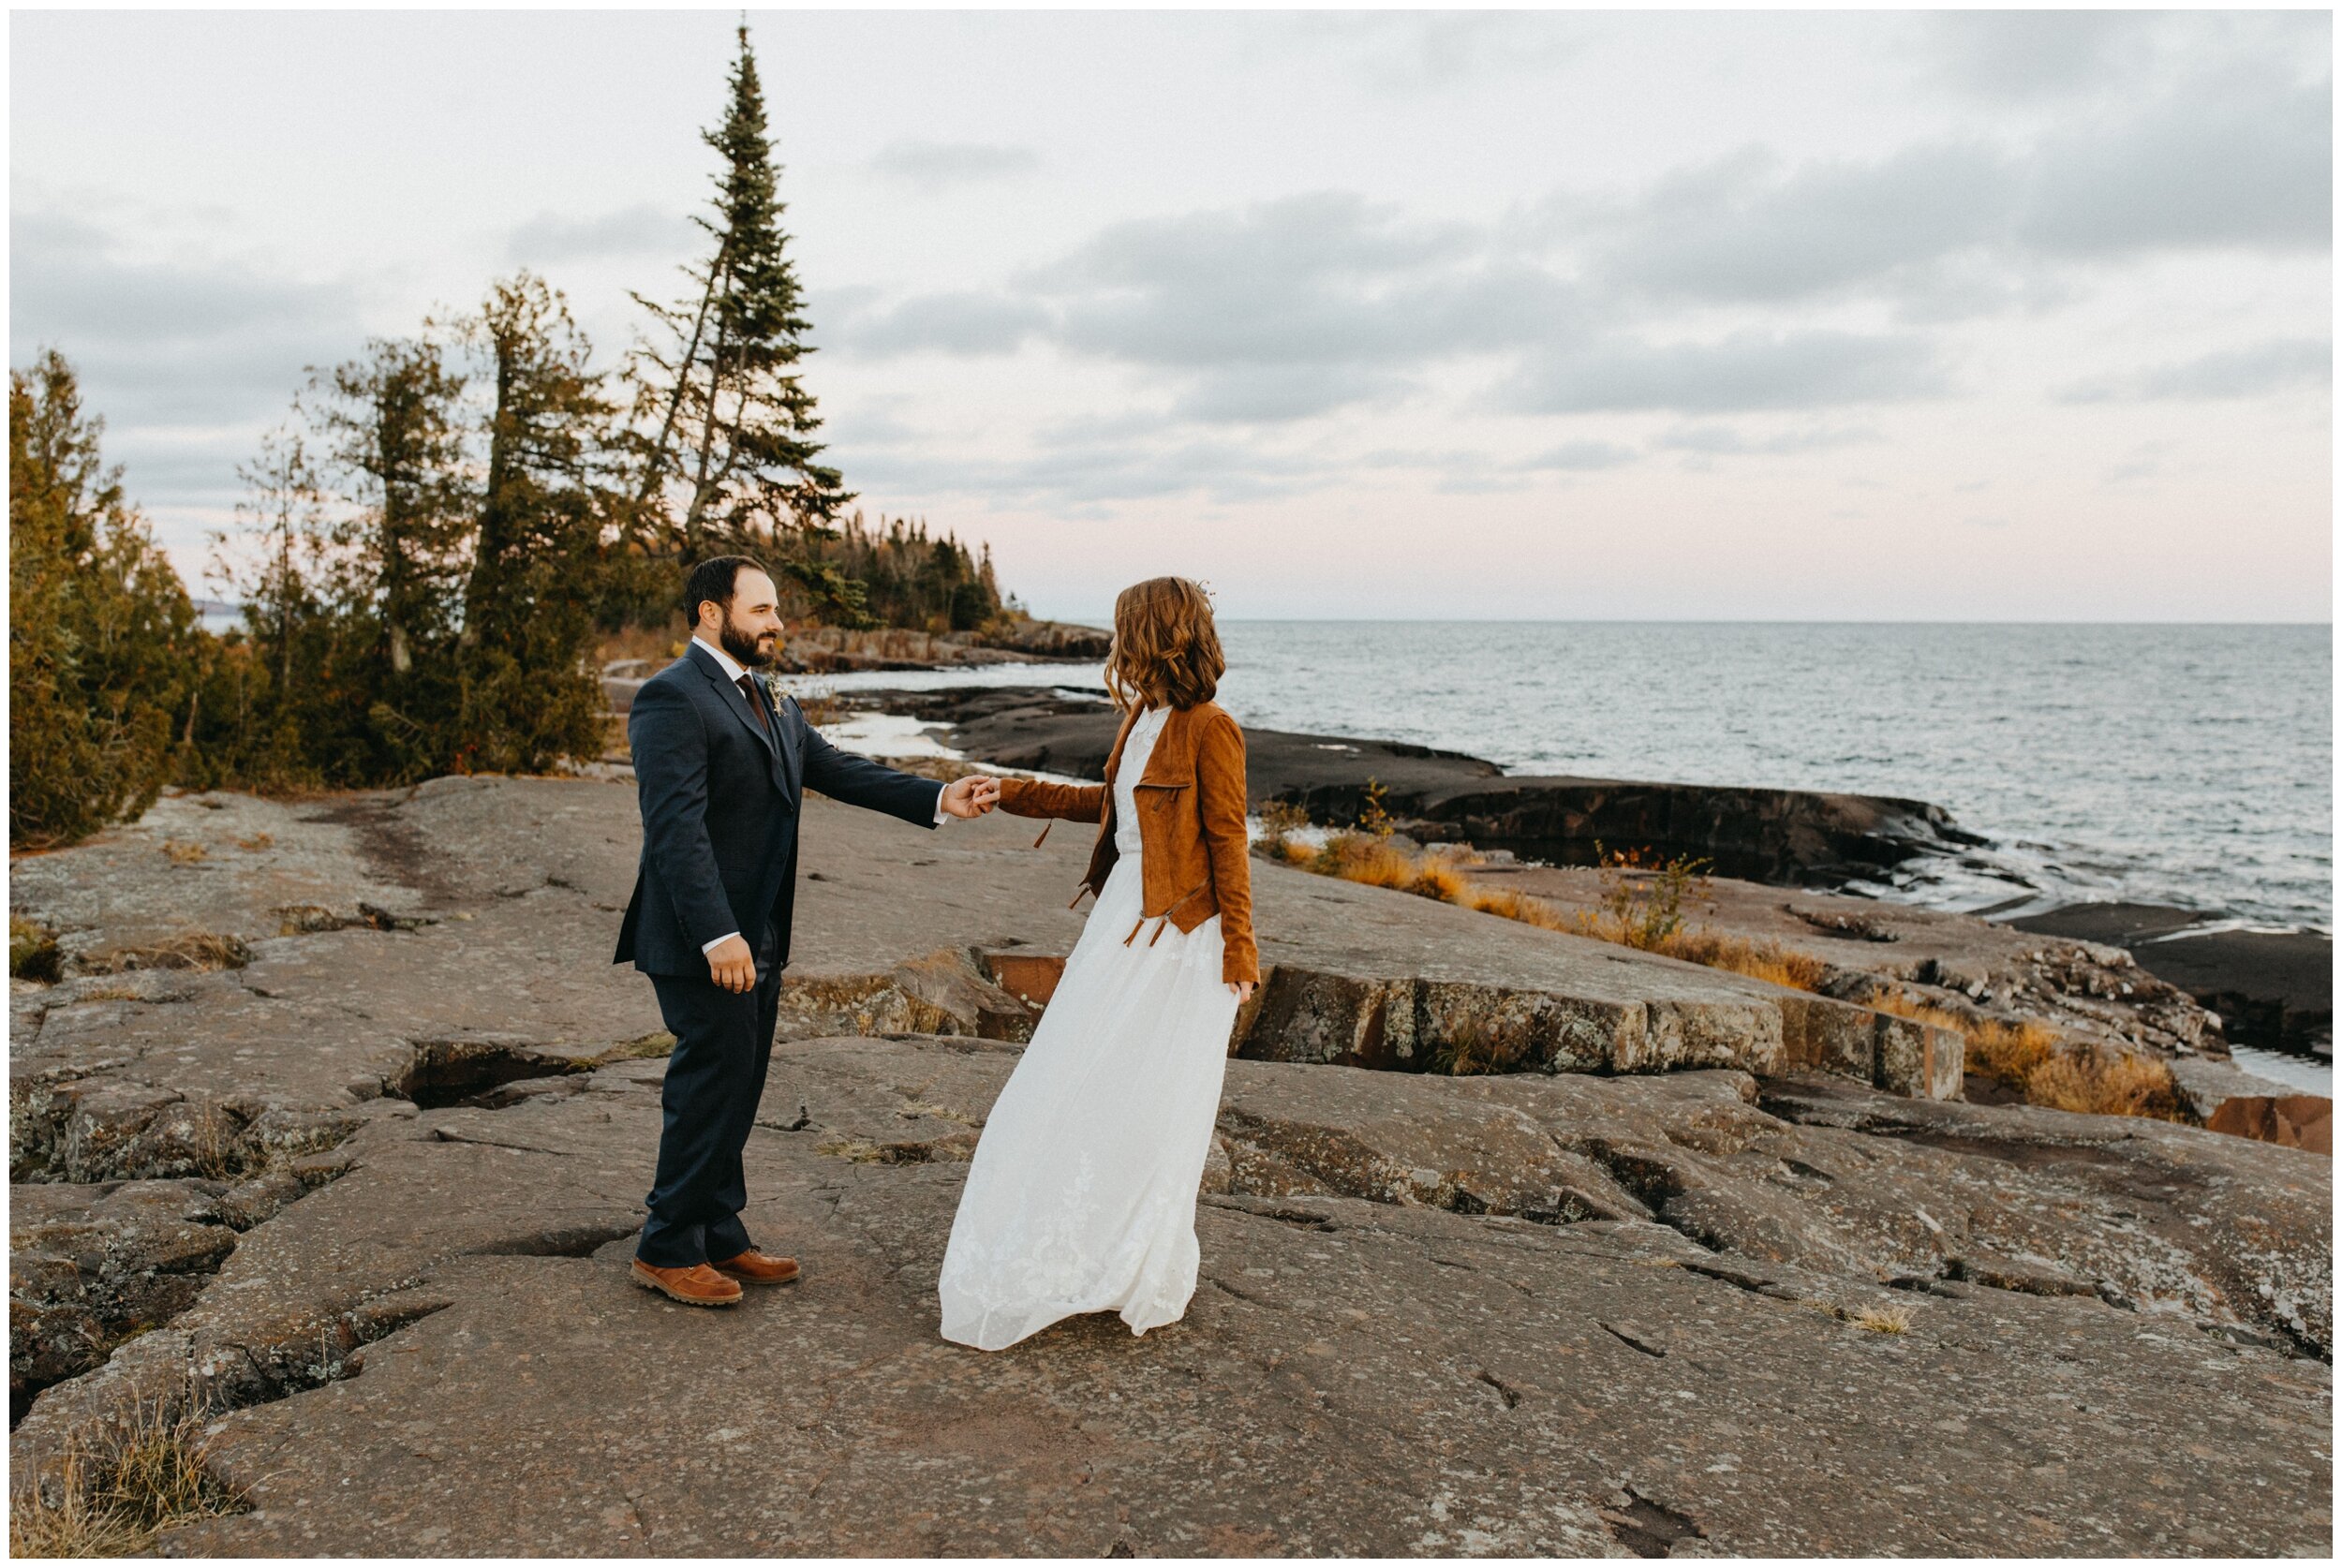 Bride and groom dance on Artists' Point after wedding in Grand Marais, Minnesota